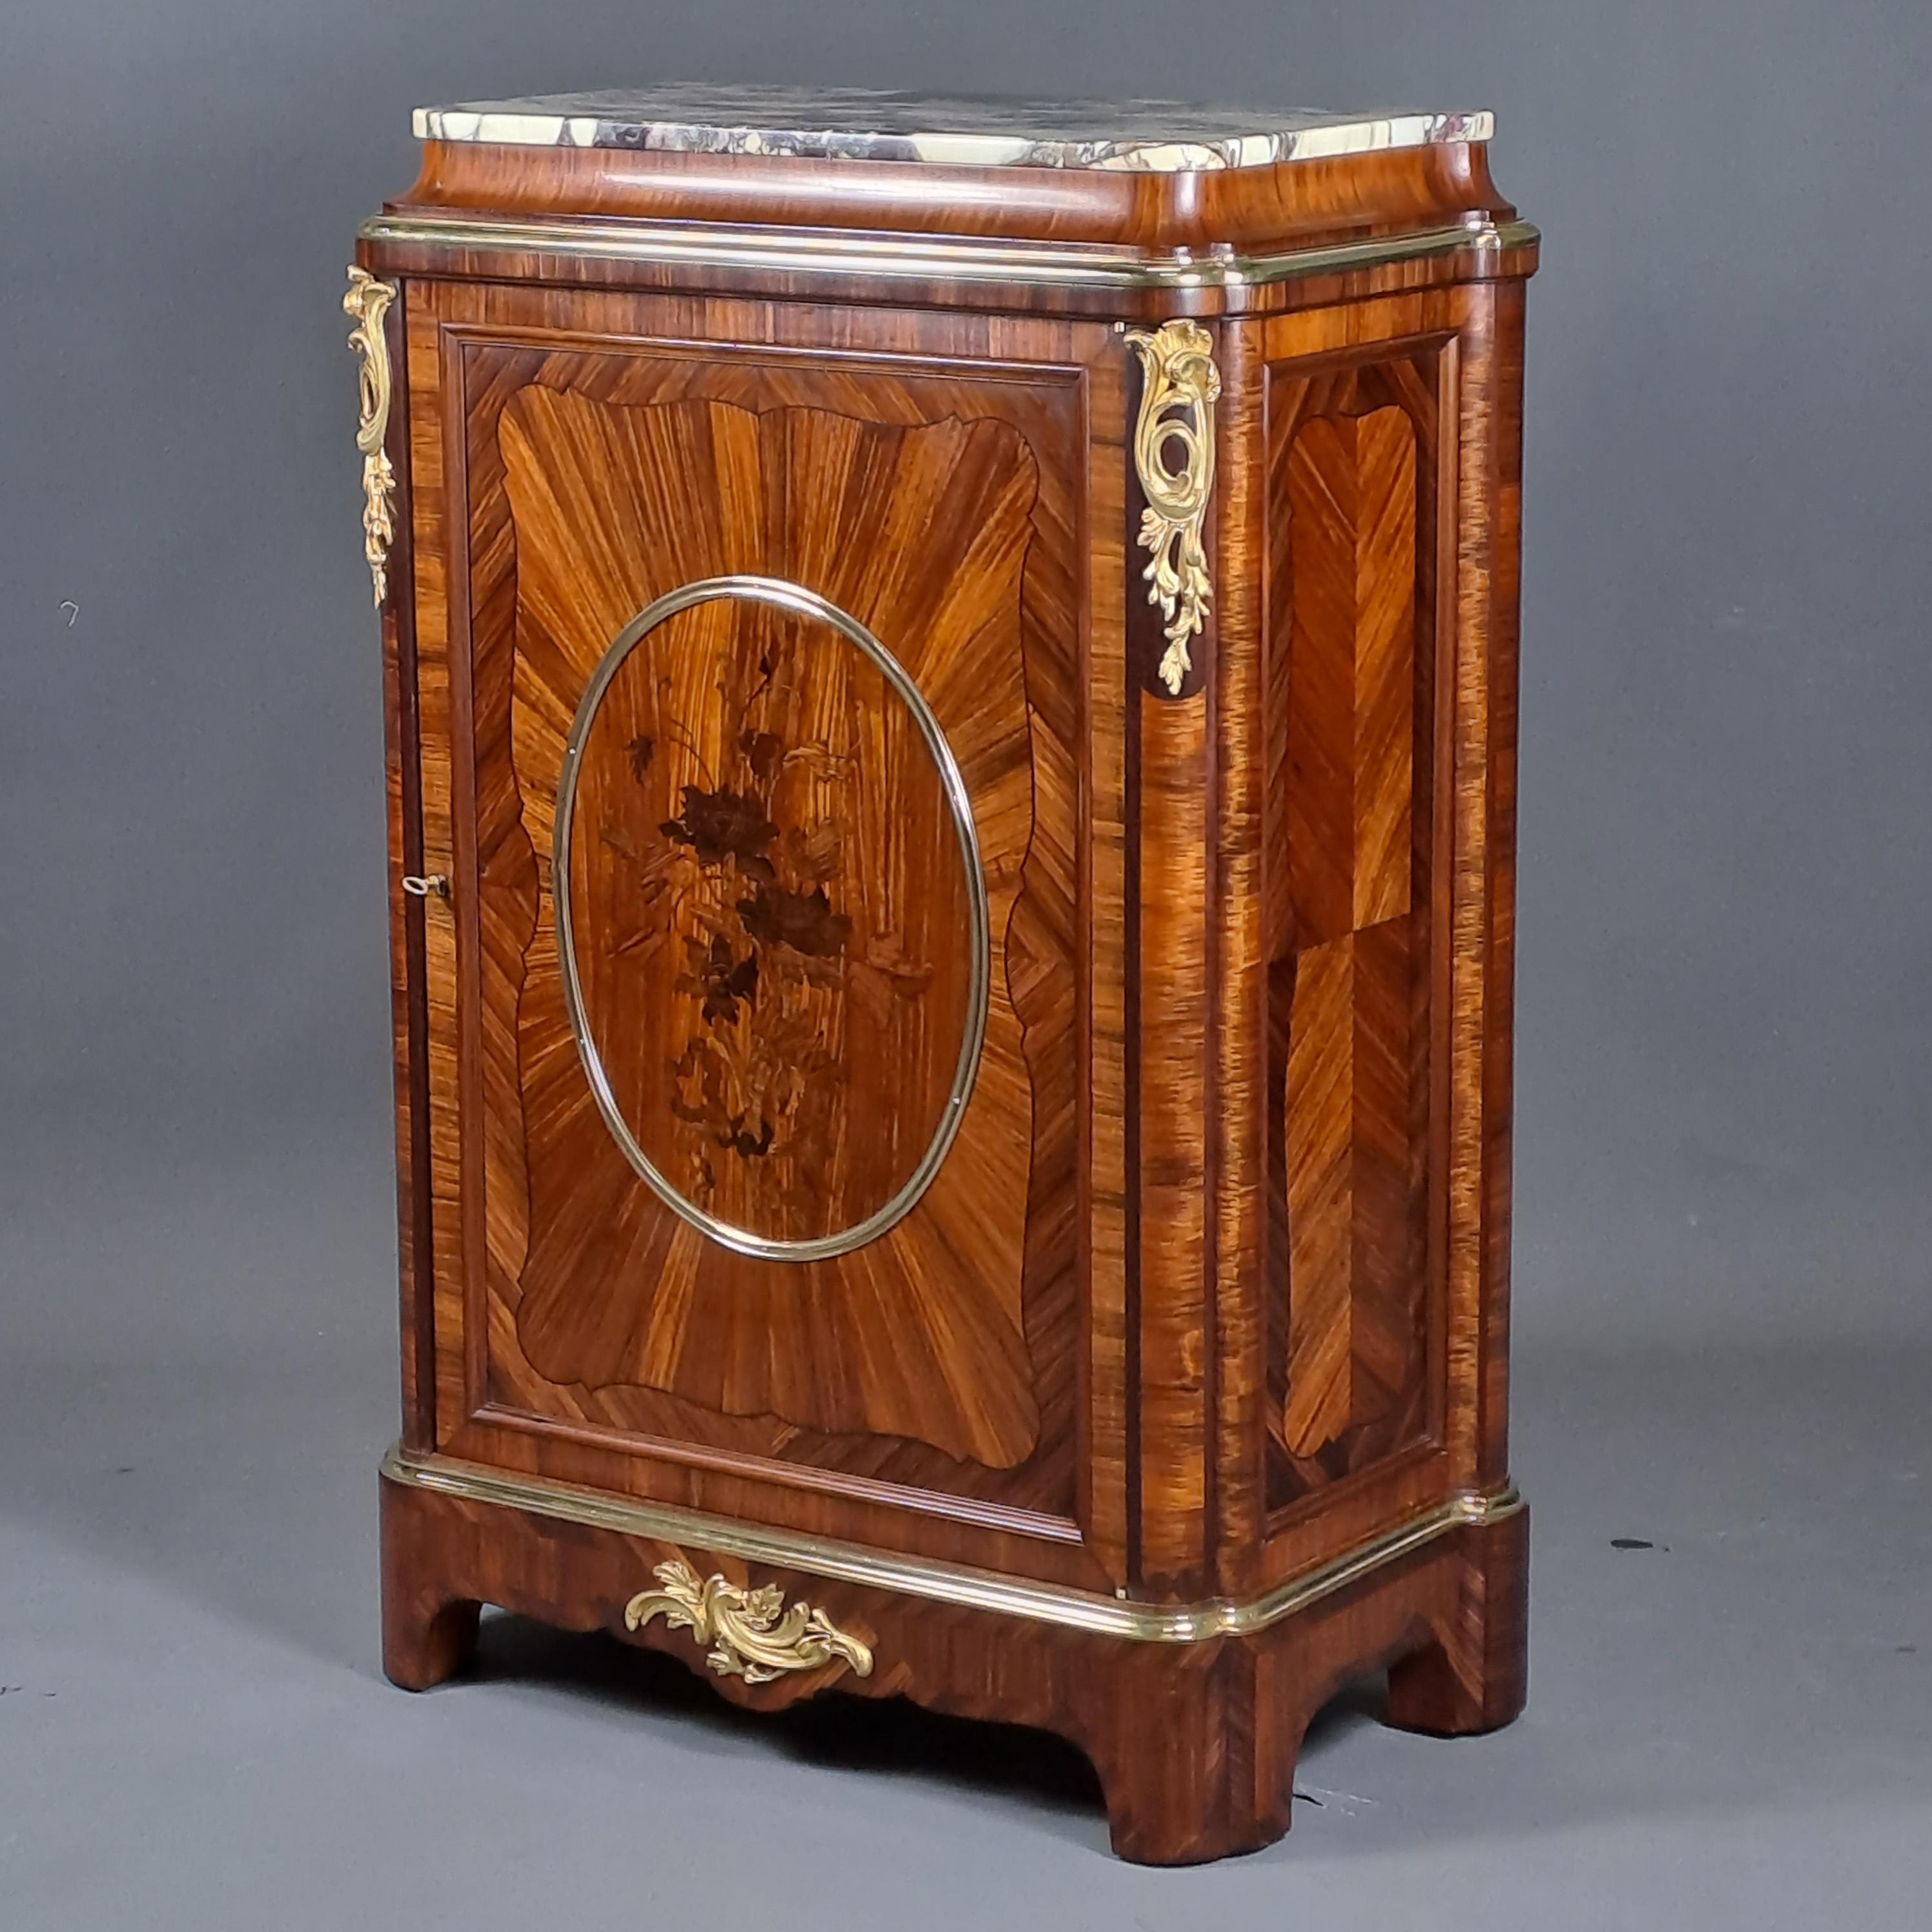  Elegant Napoleon III Meuble D'Appui in Rosewood marquetry opening a door with a medallion with a floral motif.
Oval top capped by a black veined white marble top. Rich ornamentation of finely chiseled gilt bronze.

Furniture attributed to Gervais